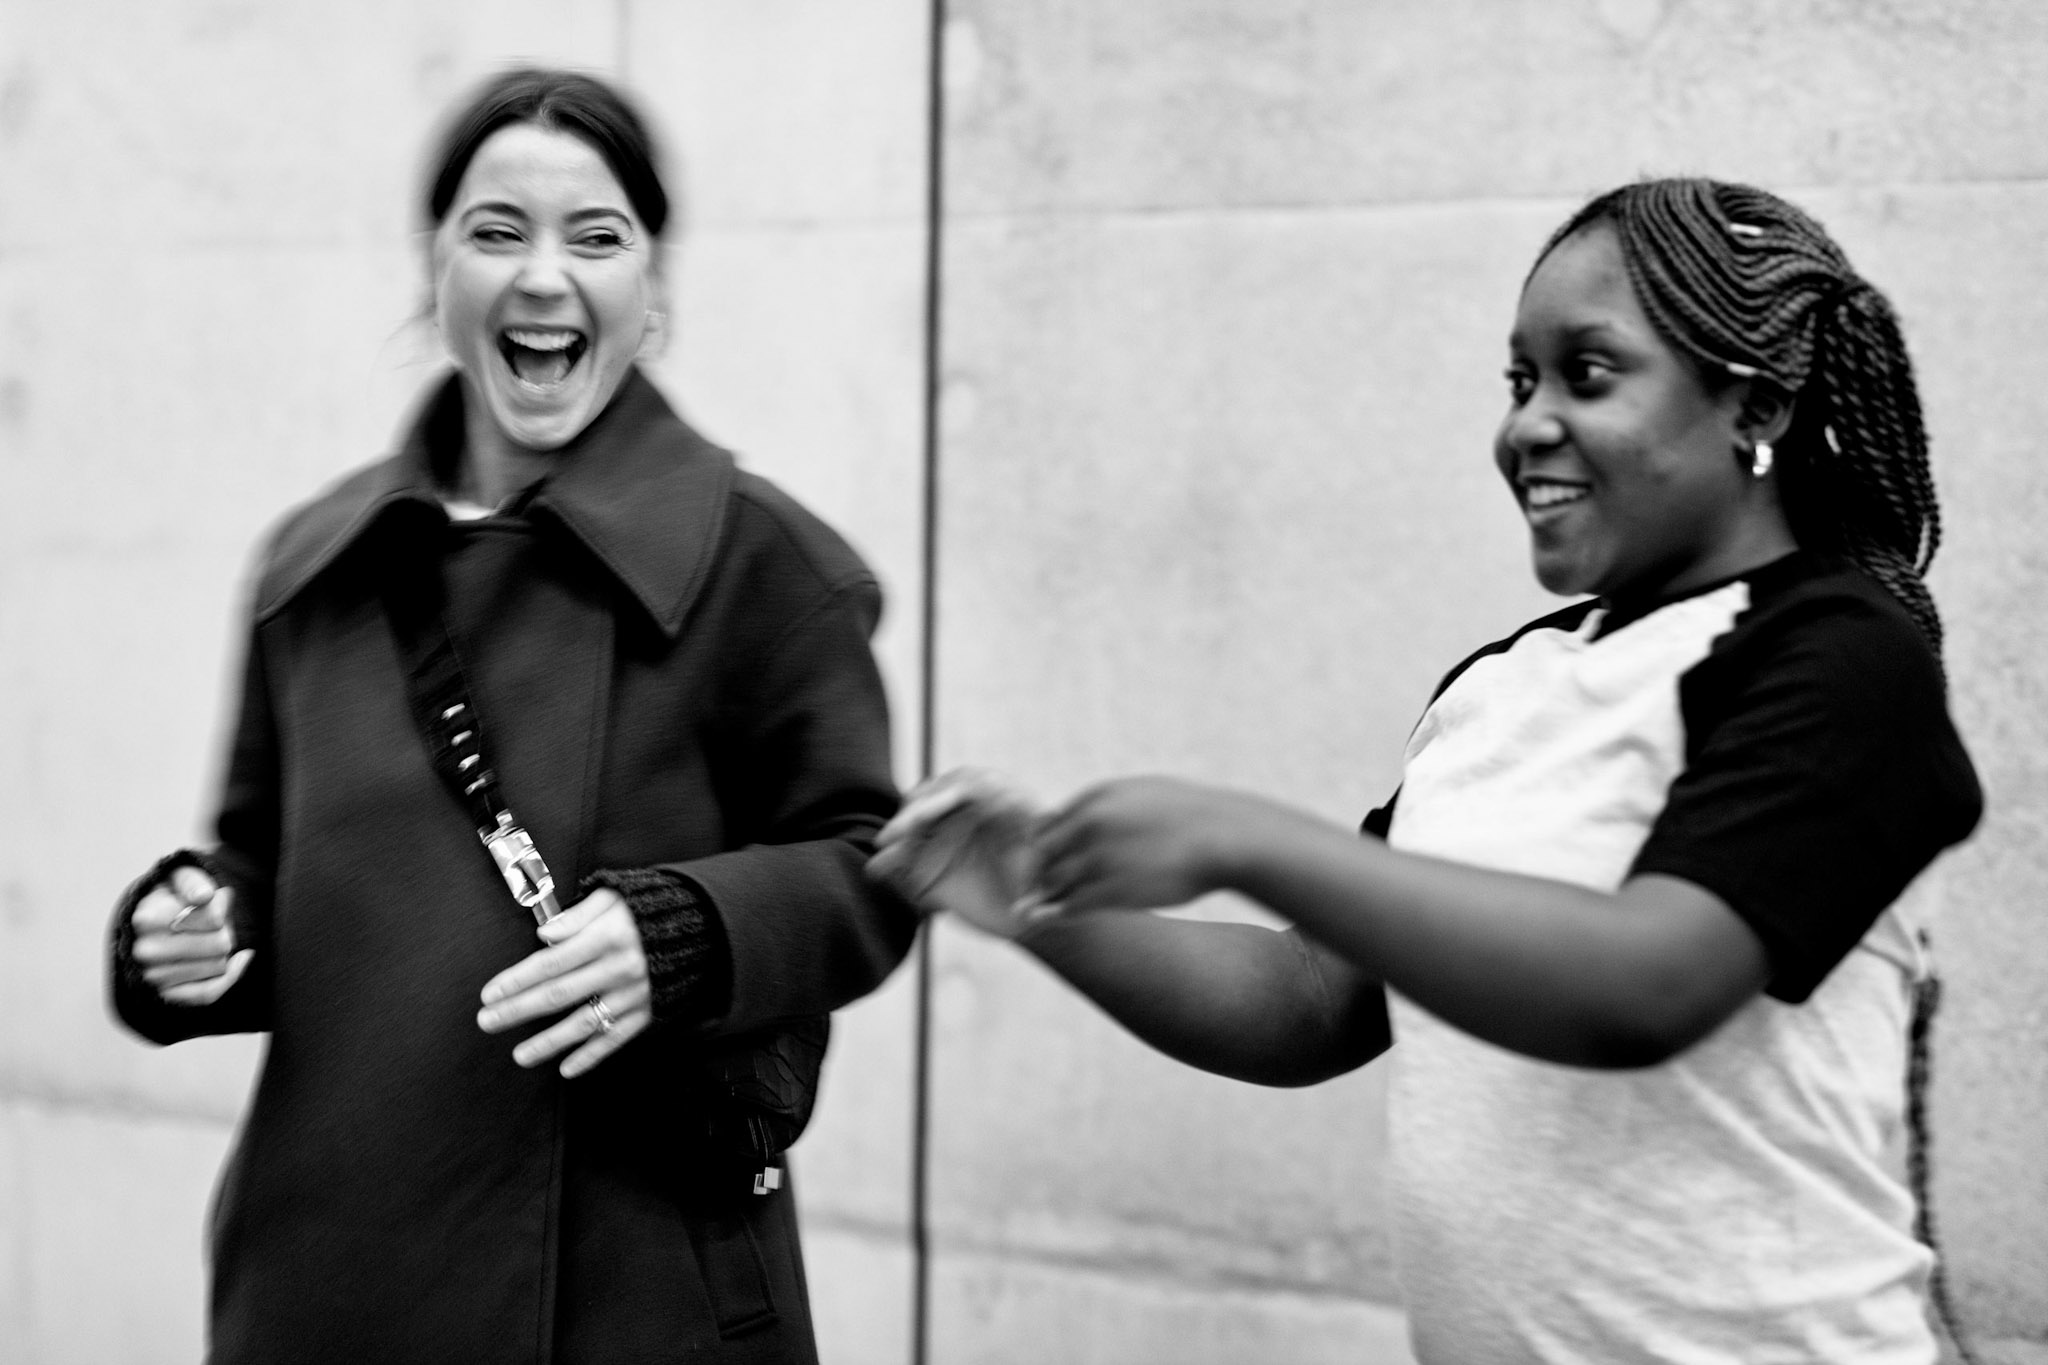 Black and white photo of Sheri working with a member of the public to learn a dance at Tate Modern